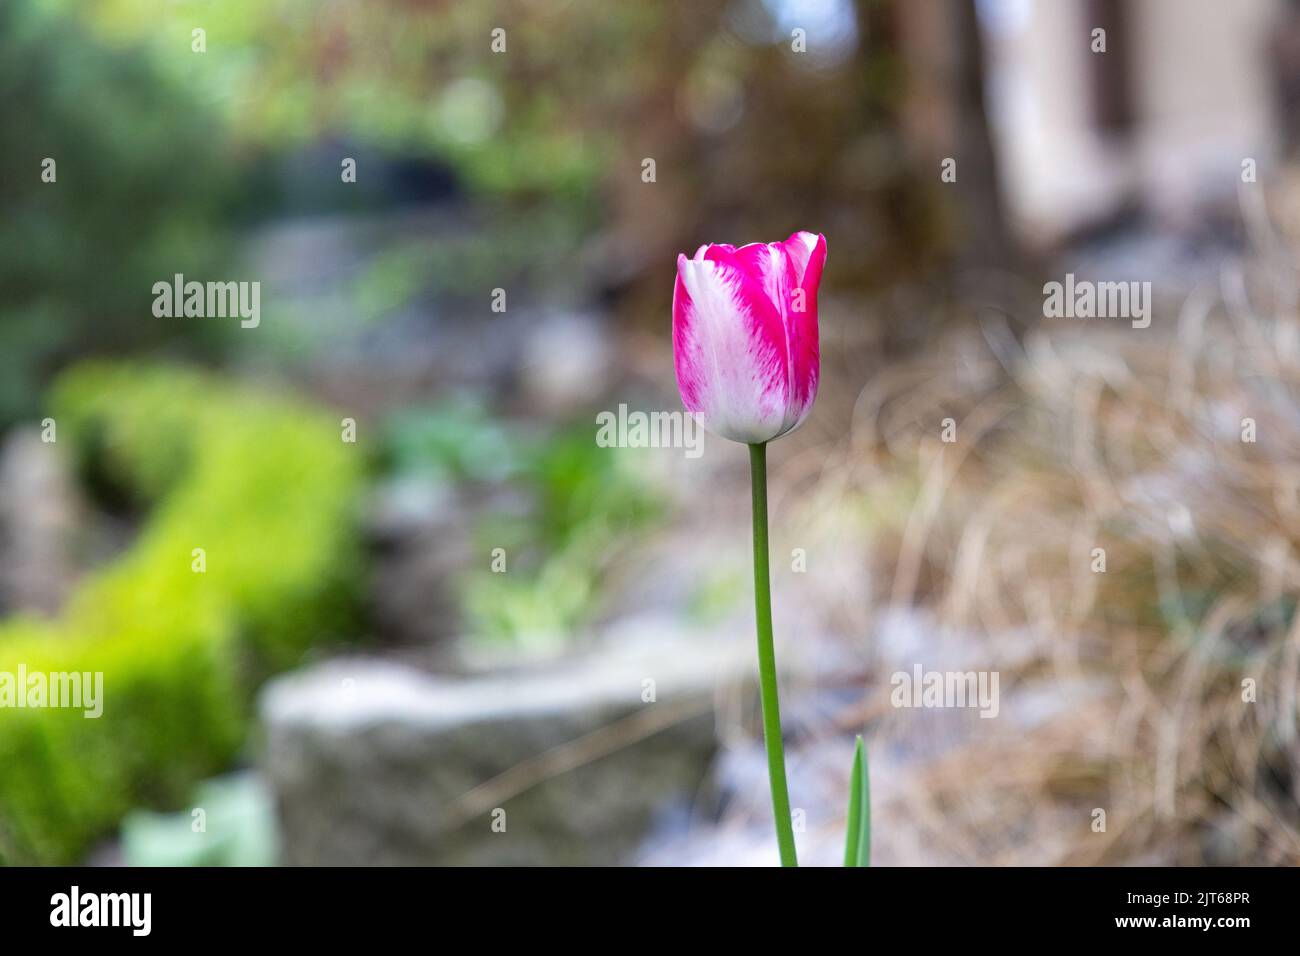 Selective focus on a multi coloured pink and white tulp flower during flowering season Stock Photo